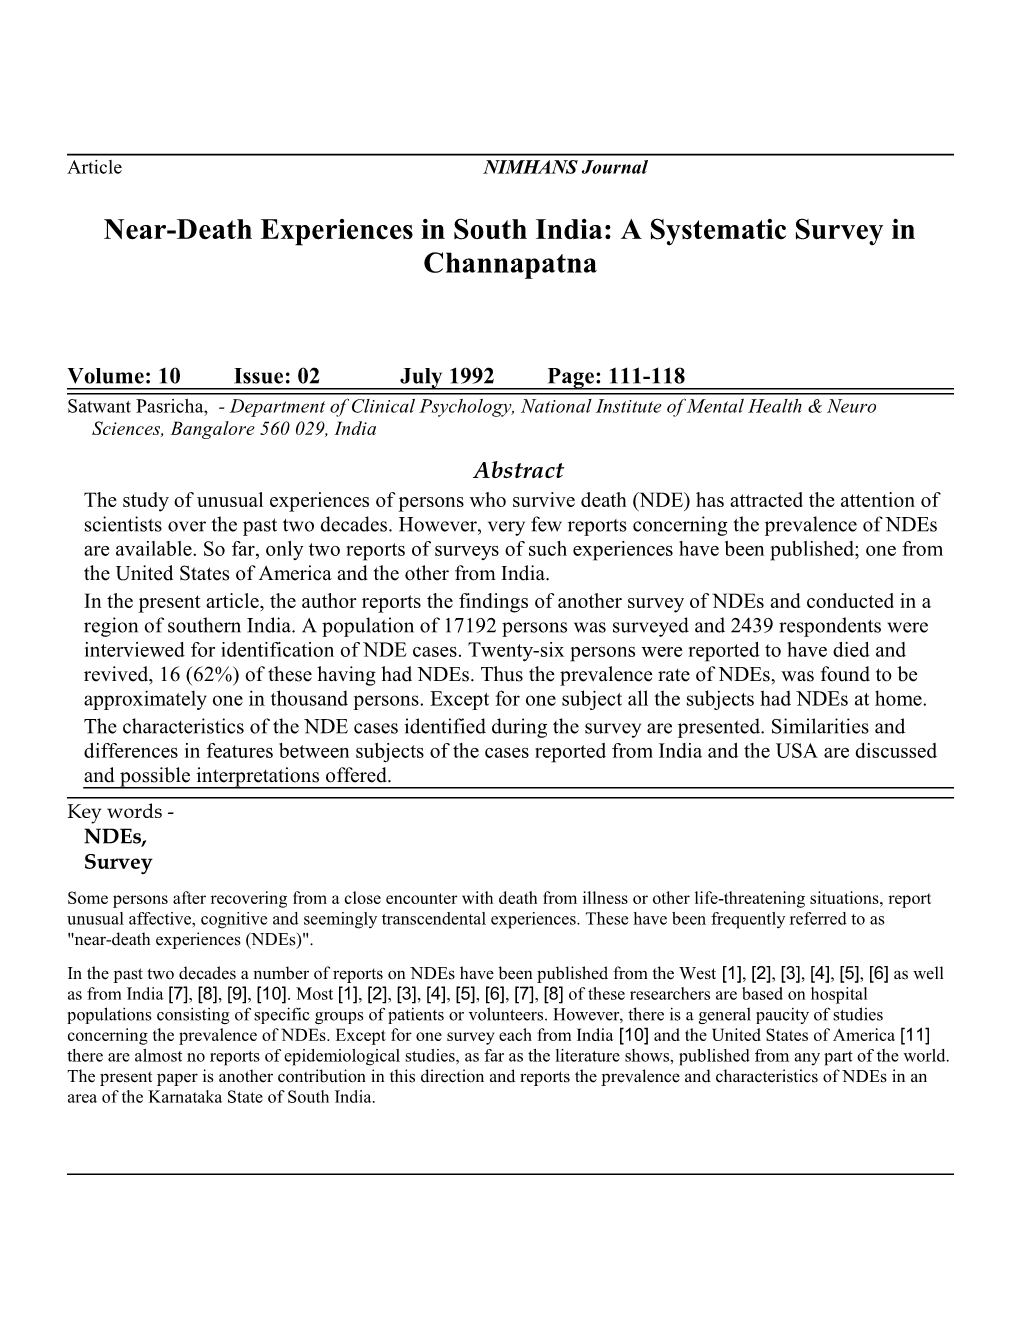 Near-Death Experiences in South India: a Systematic Survey in Channapatna